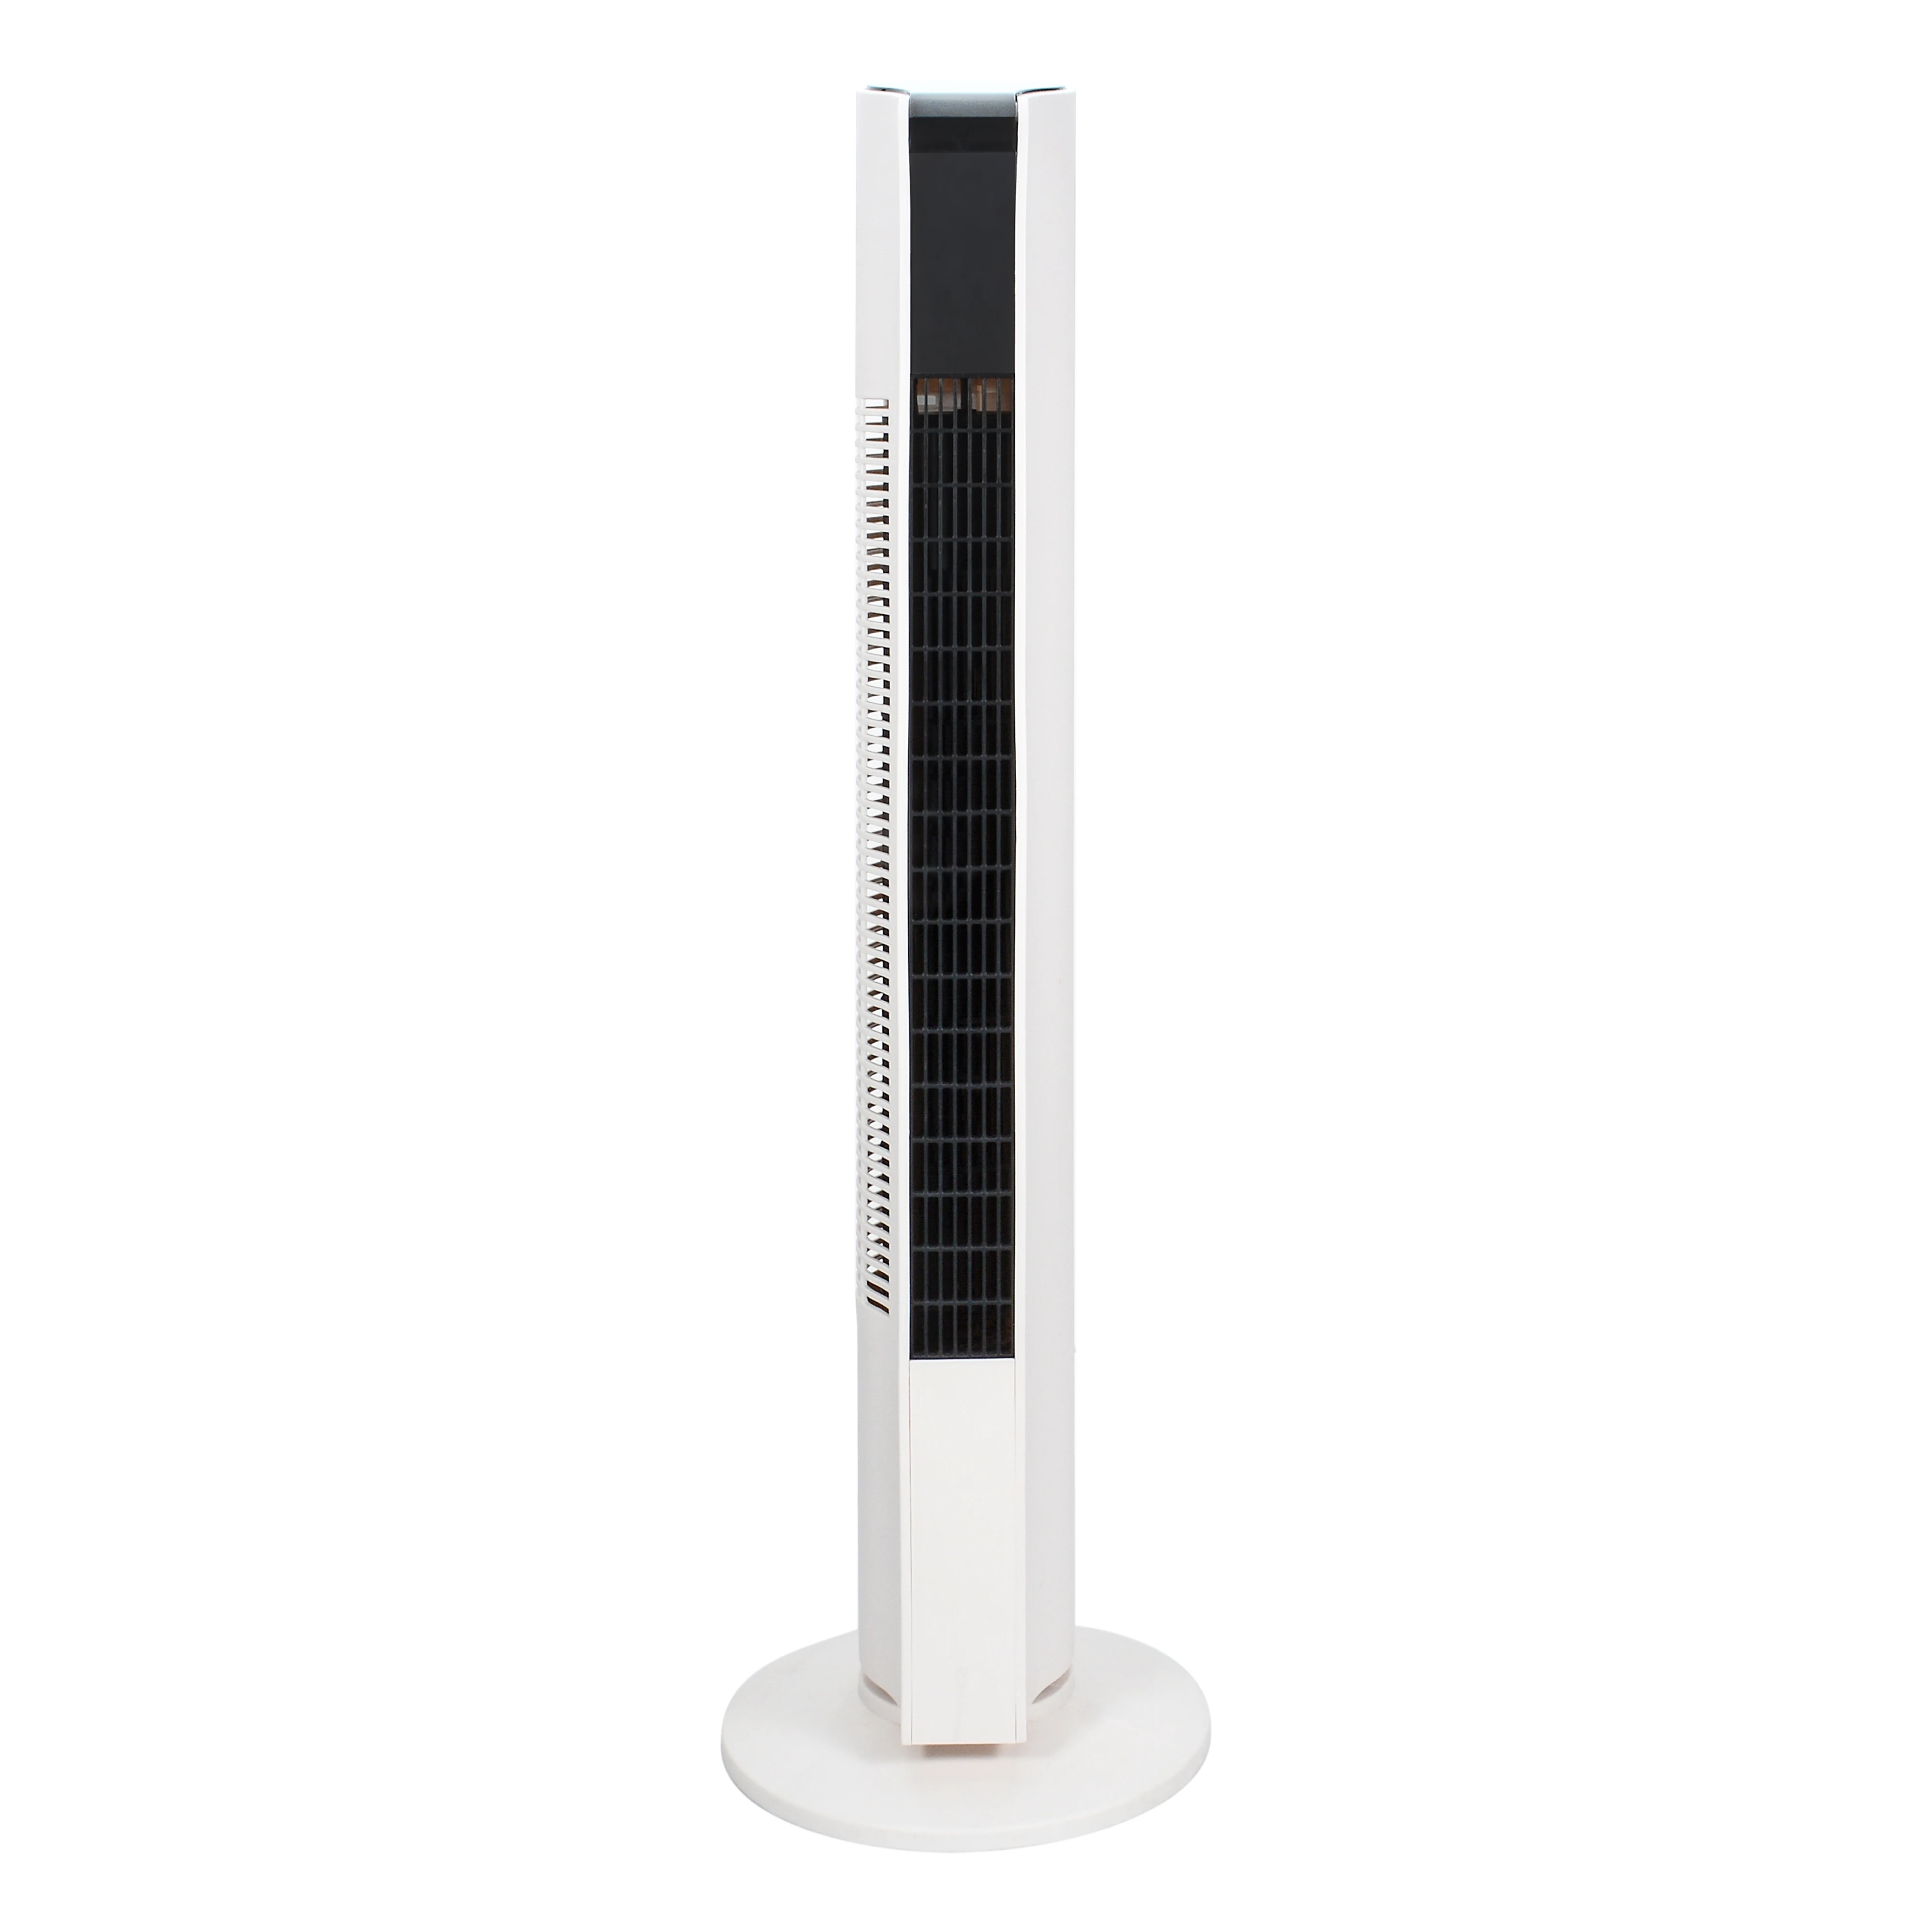 

Summer 32 inch Quiet Silent air cooling fan smart with remote control Electric Rotating bladeless Floor Standing tower fan